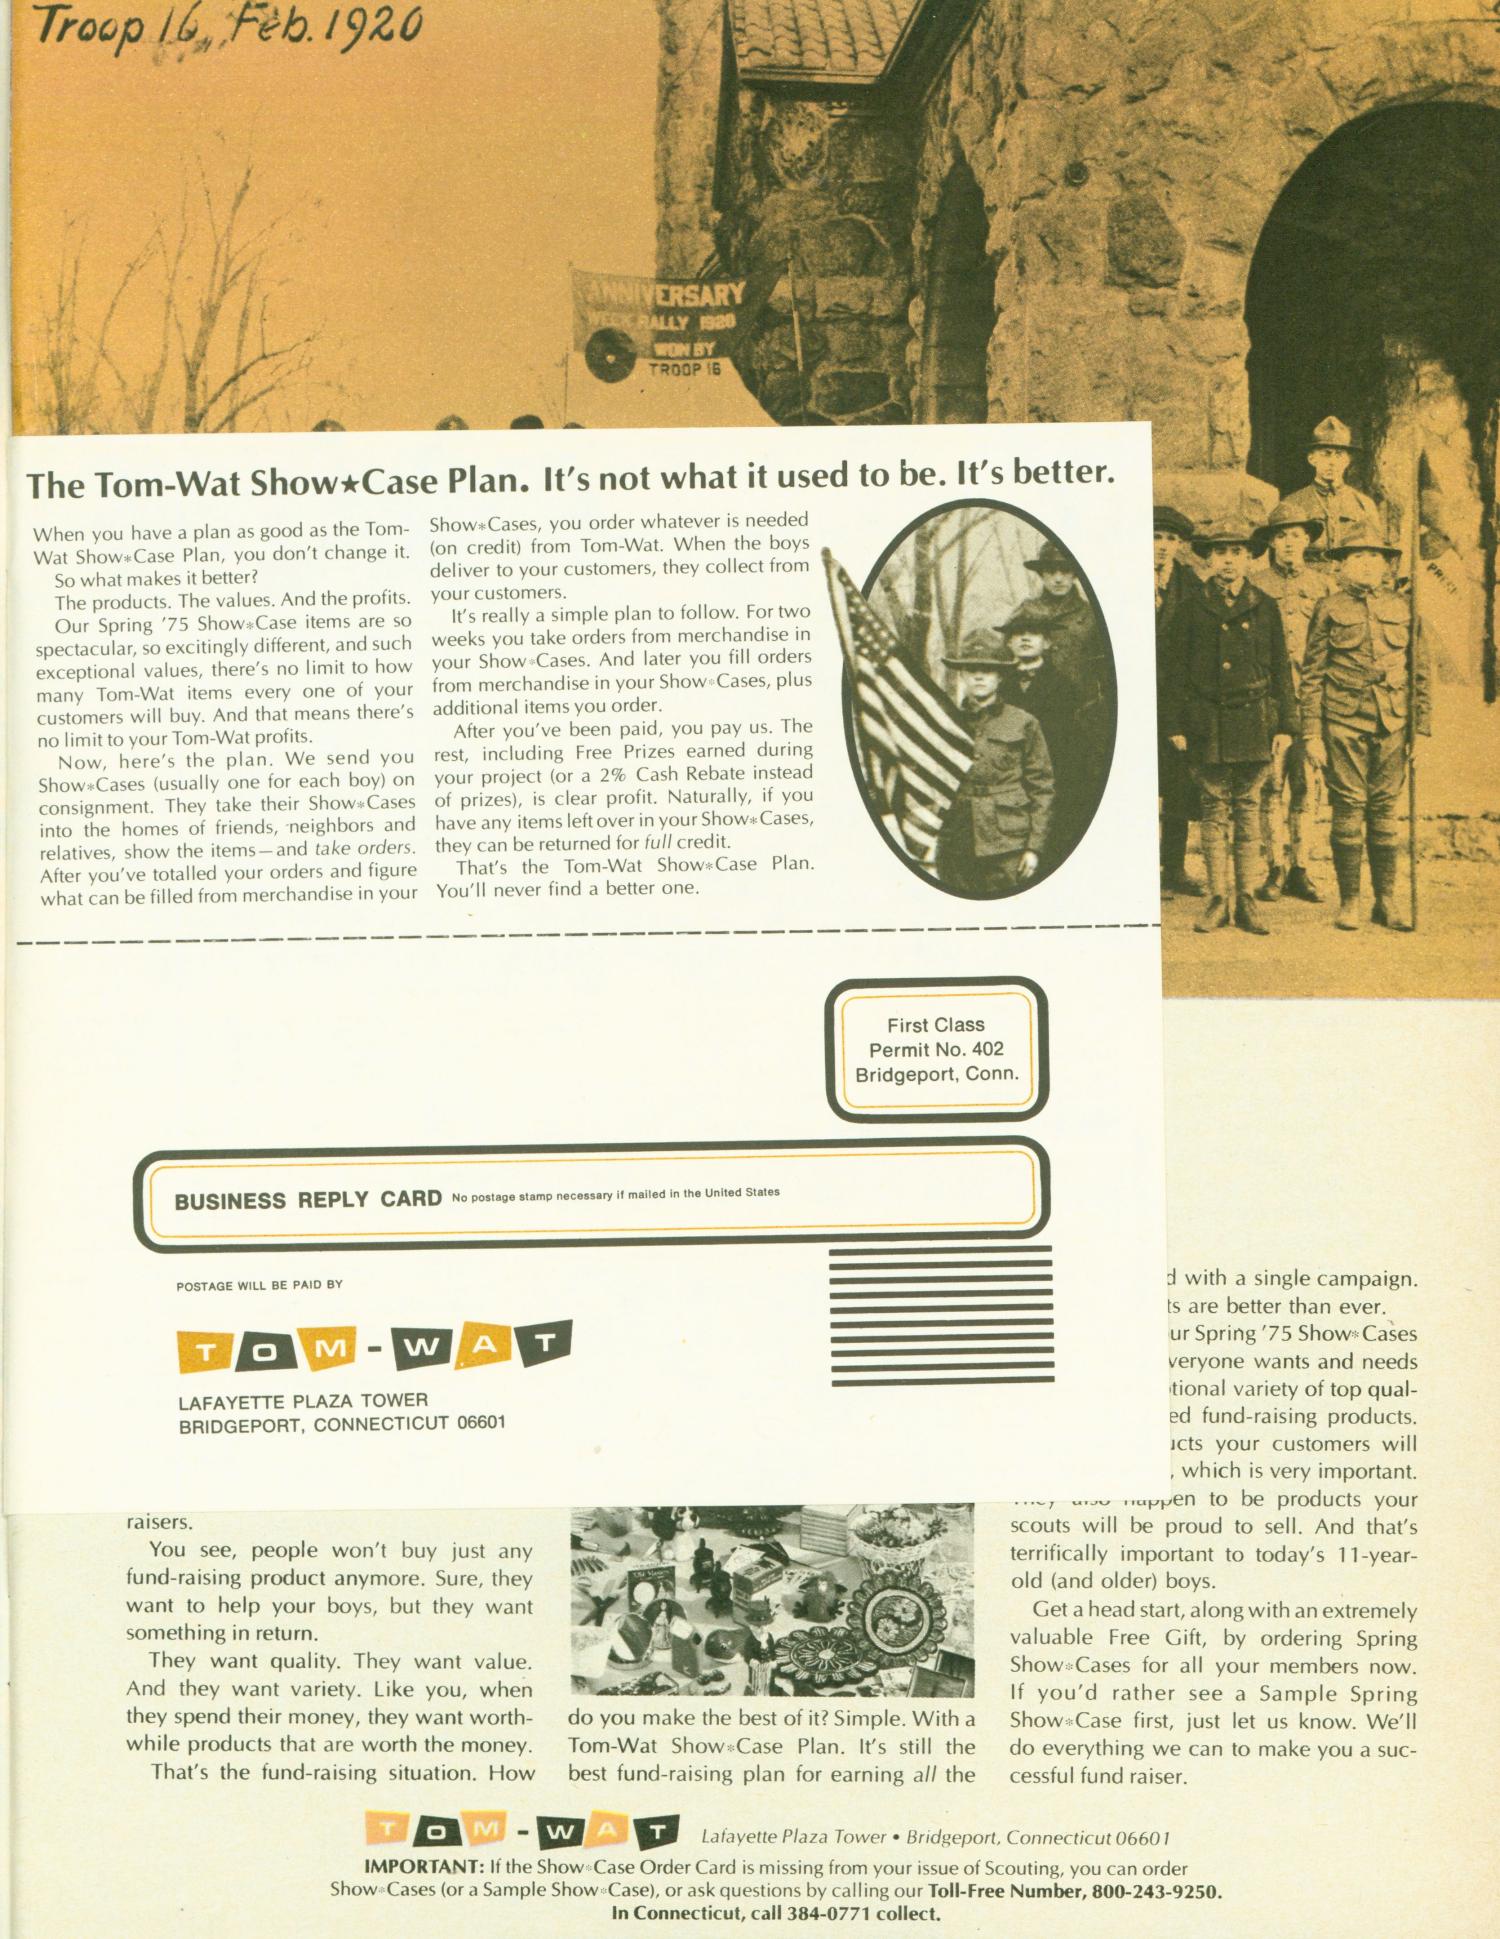 Scouting, Volume 63, Number 1, January-February 1975
                                                
                                                    None
                                                